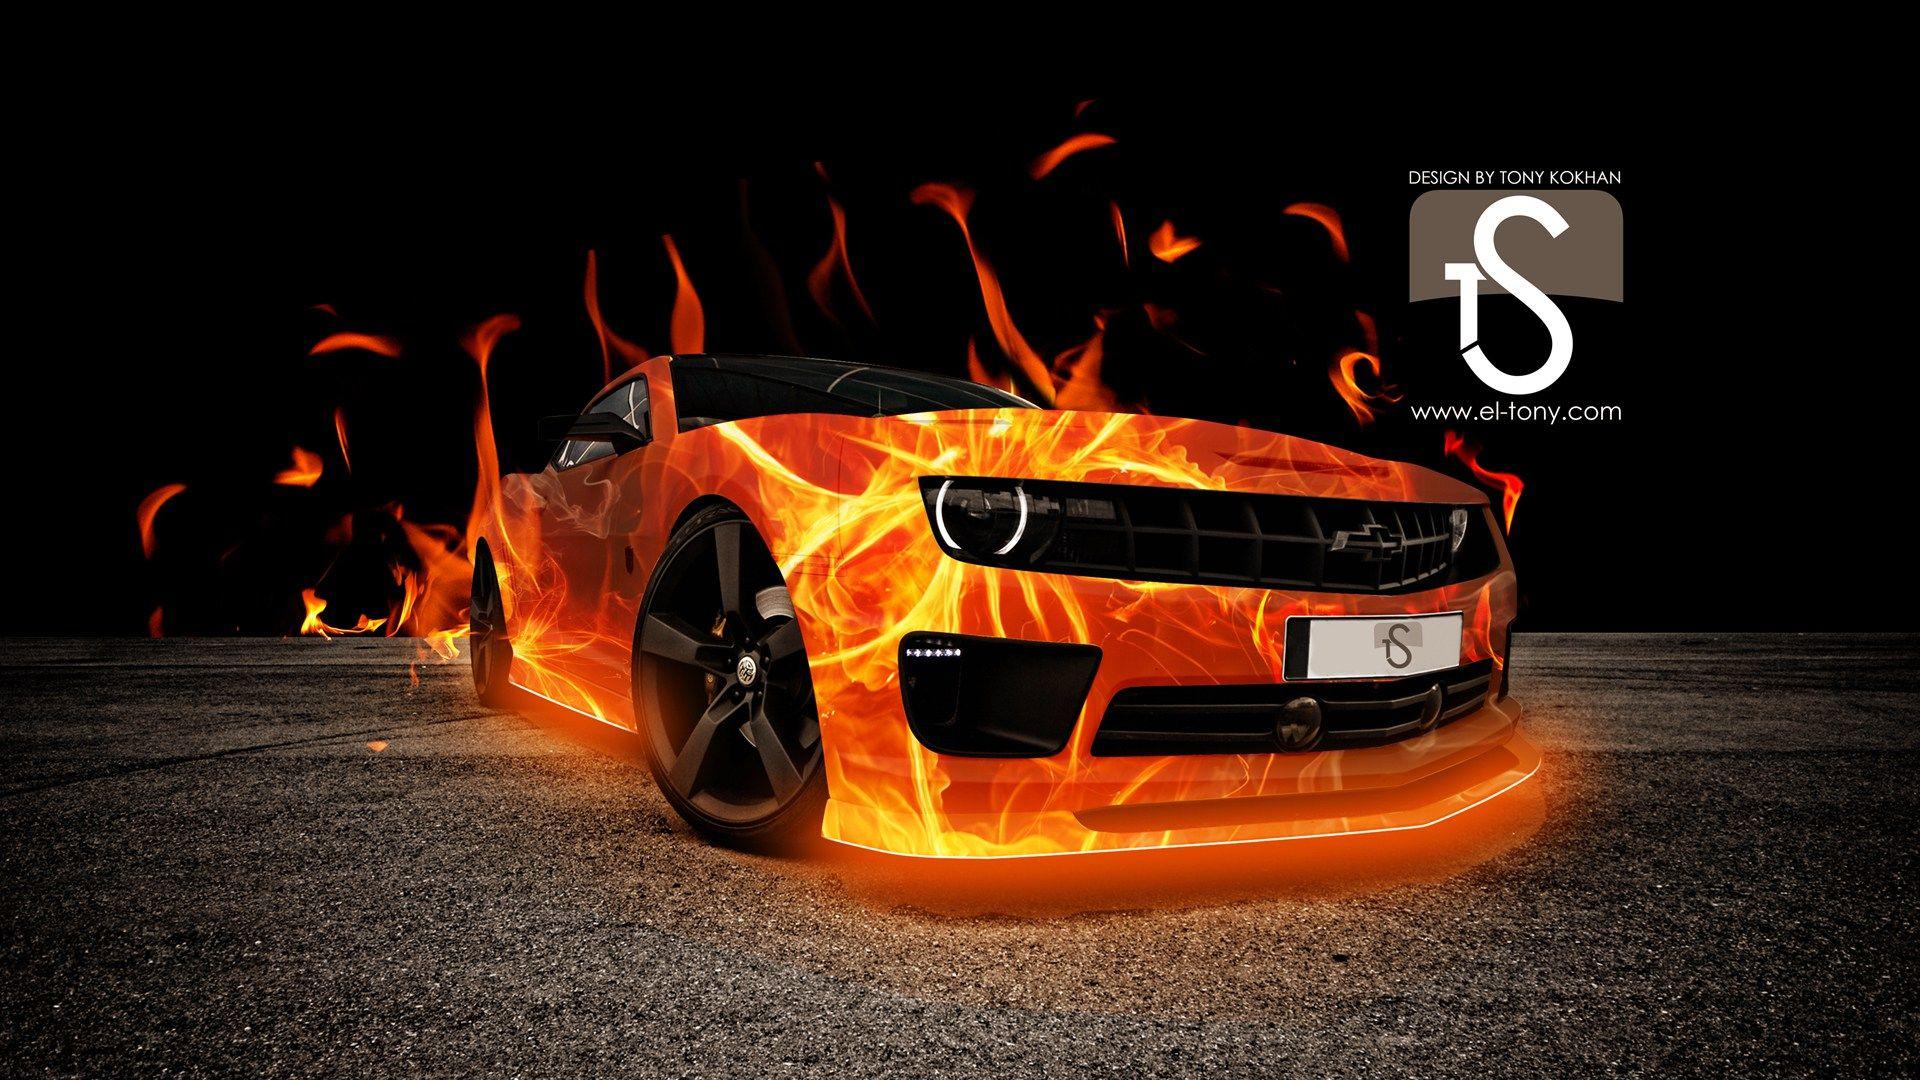 Fire Car Abstract Wallpaper 1080p Free HD Resolutions